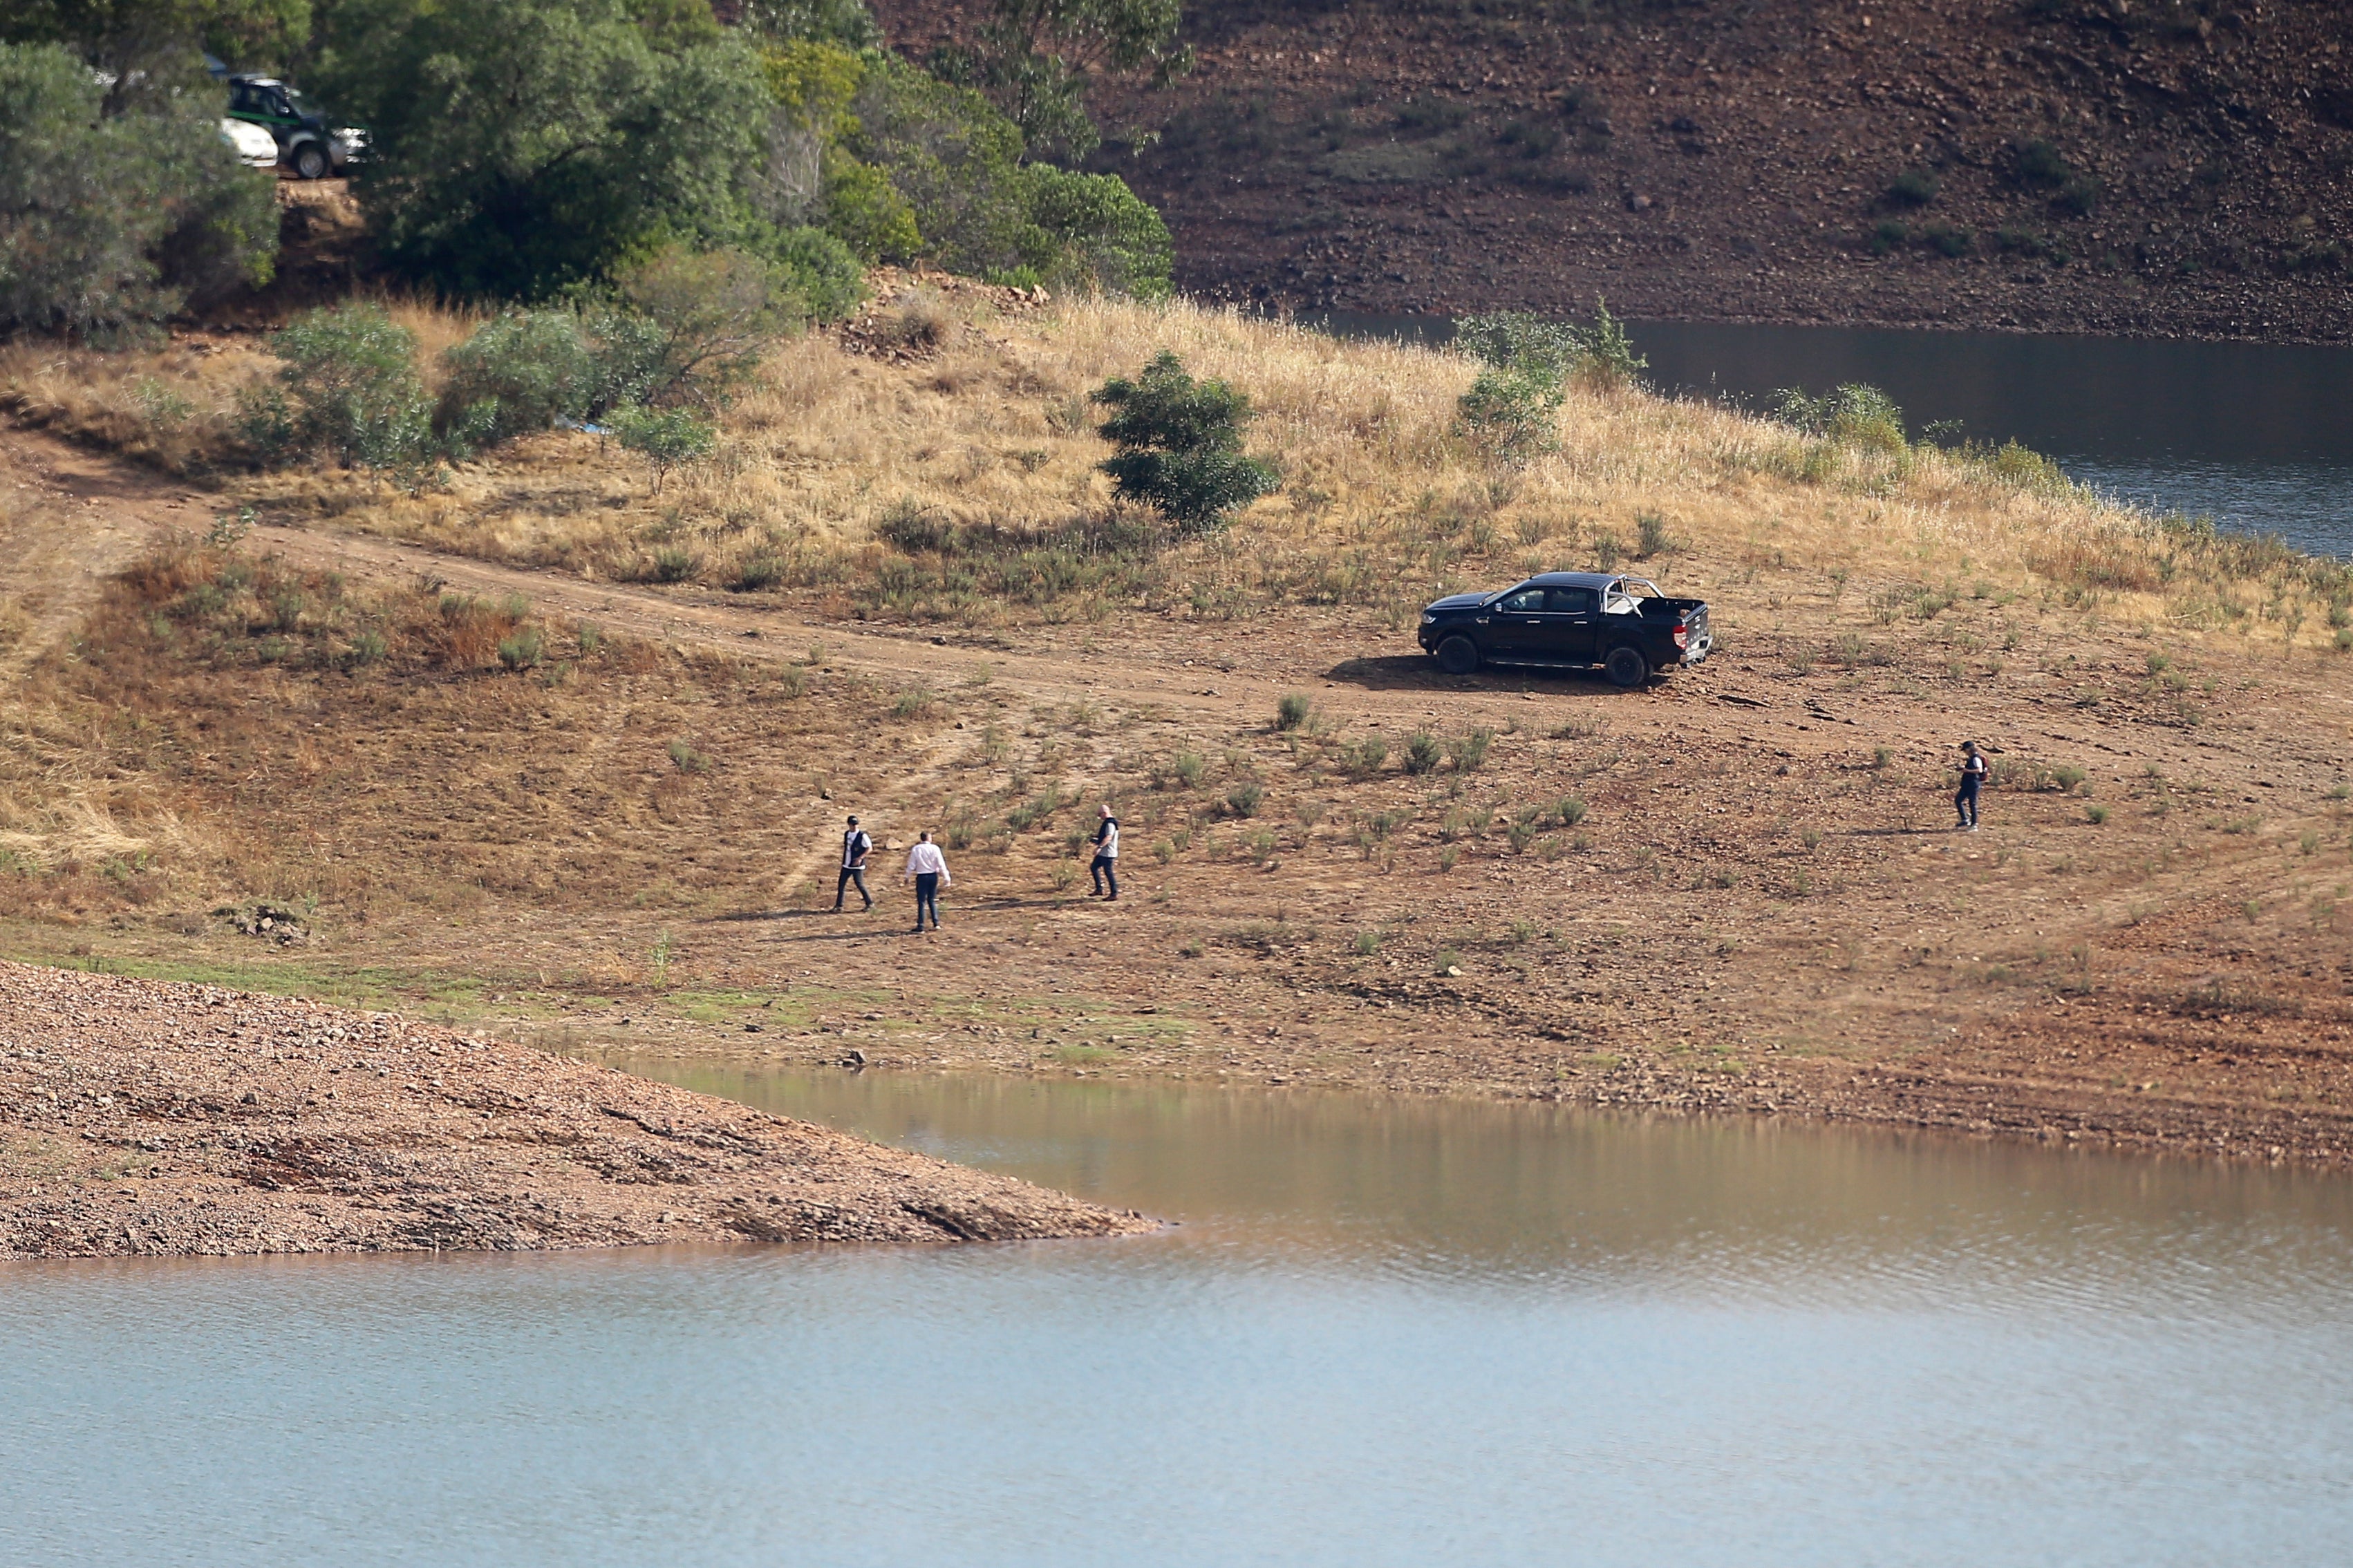 The Arade Dam reservoir in Portugal was searched in June